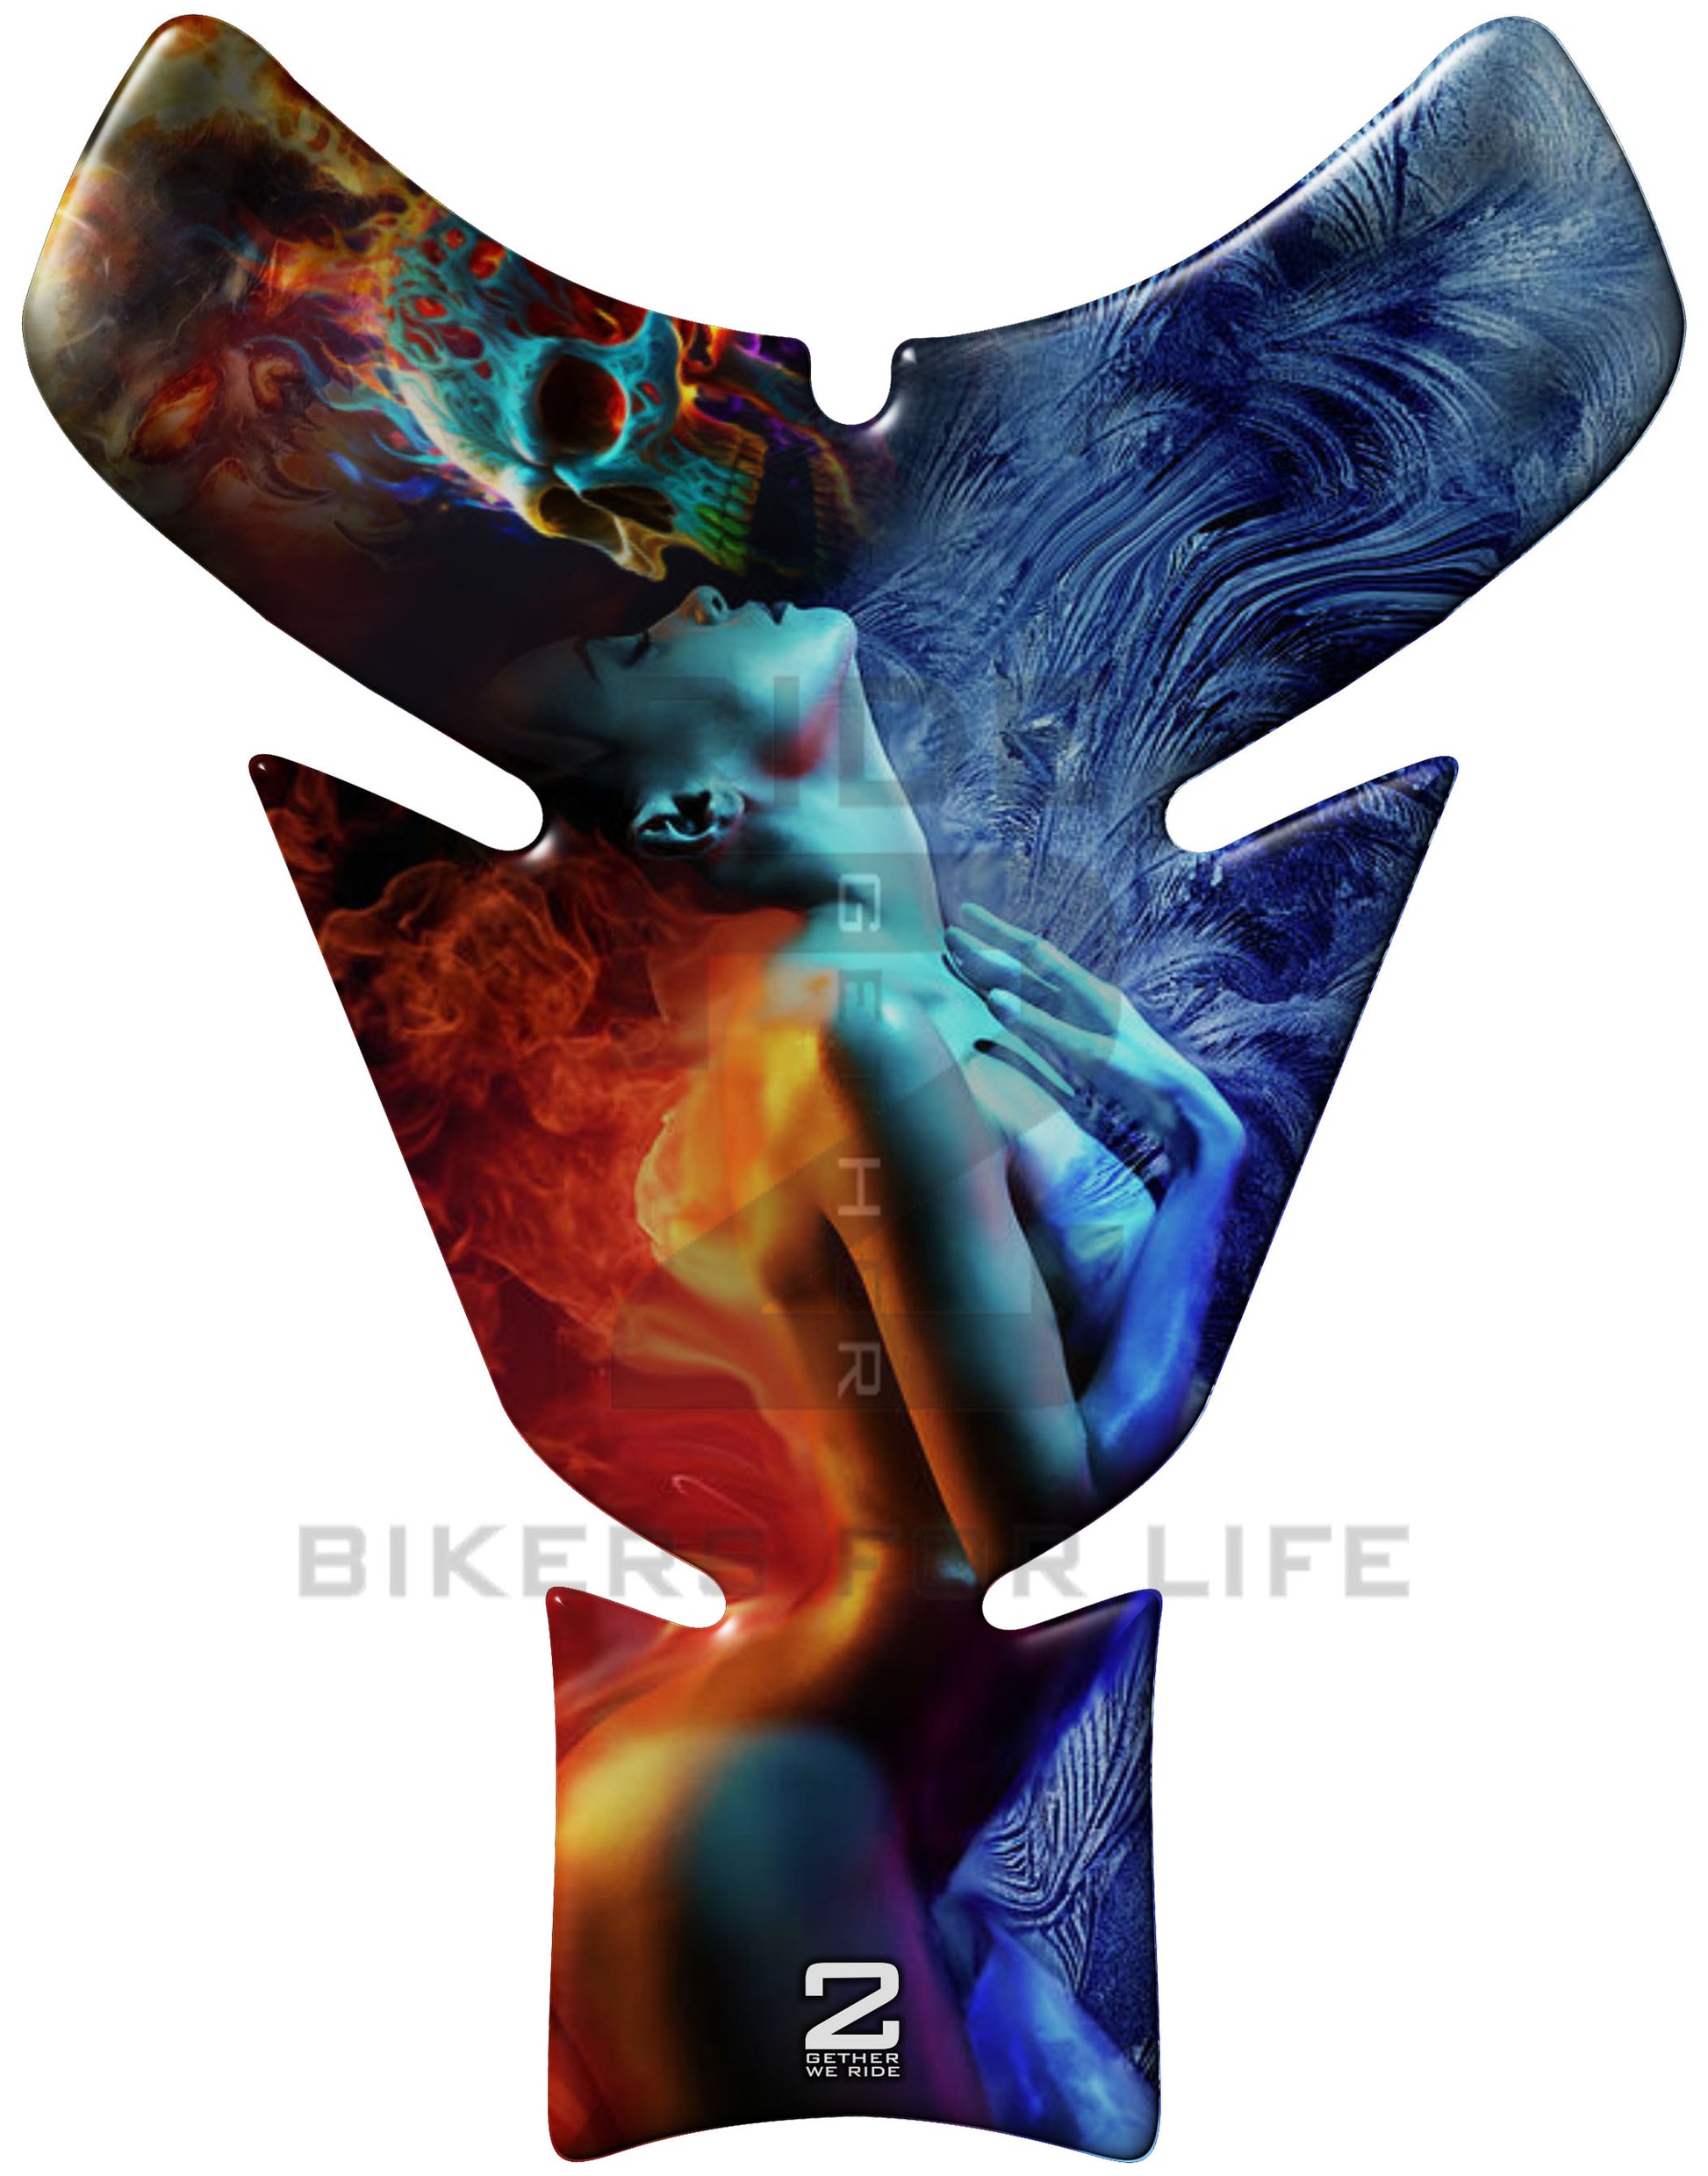 Fire and Ice Neon Skull Kissing Lady Bike Tank Pad Protector. A Street Pad which fits most motorcycles.